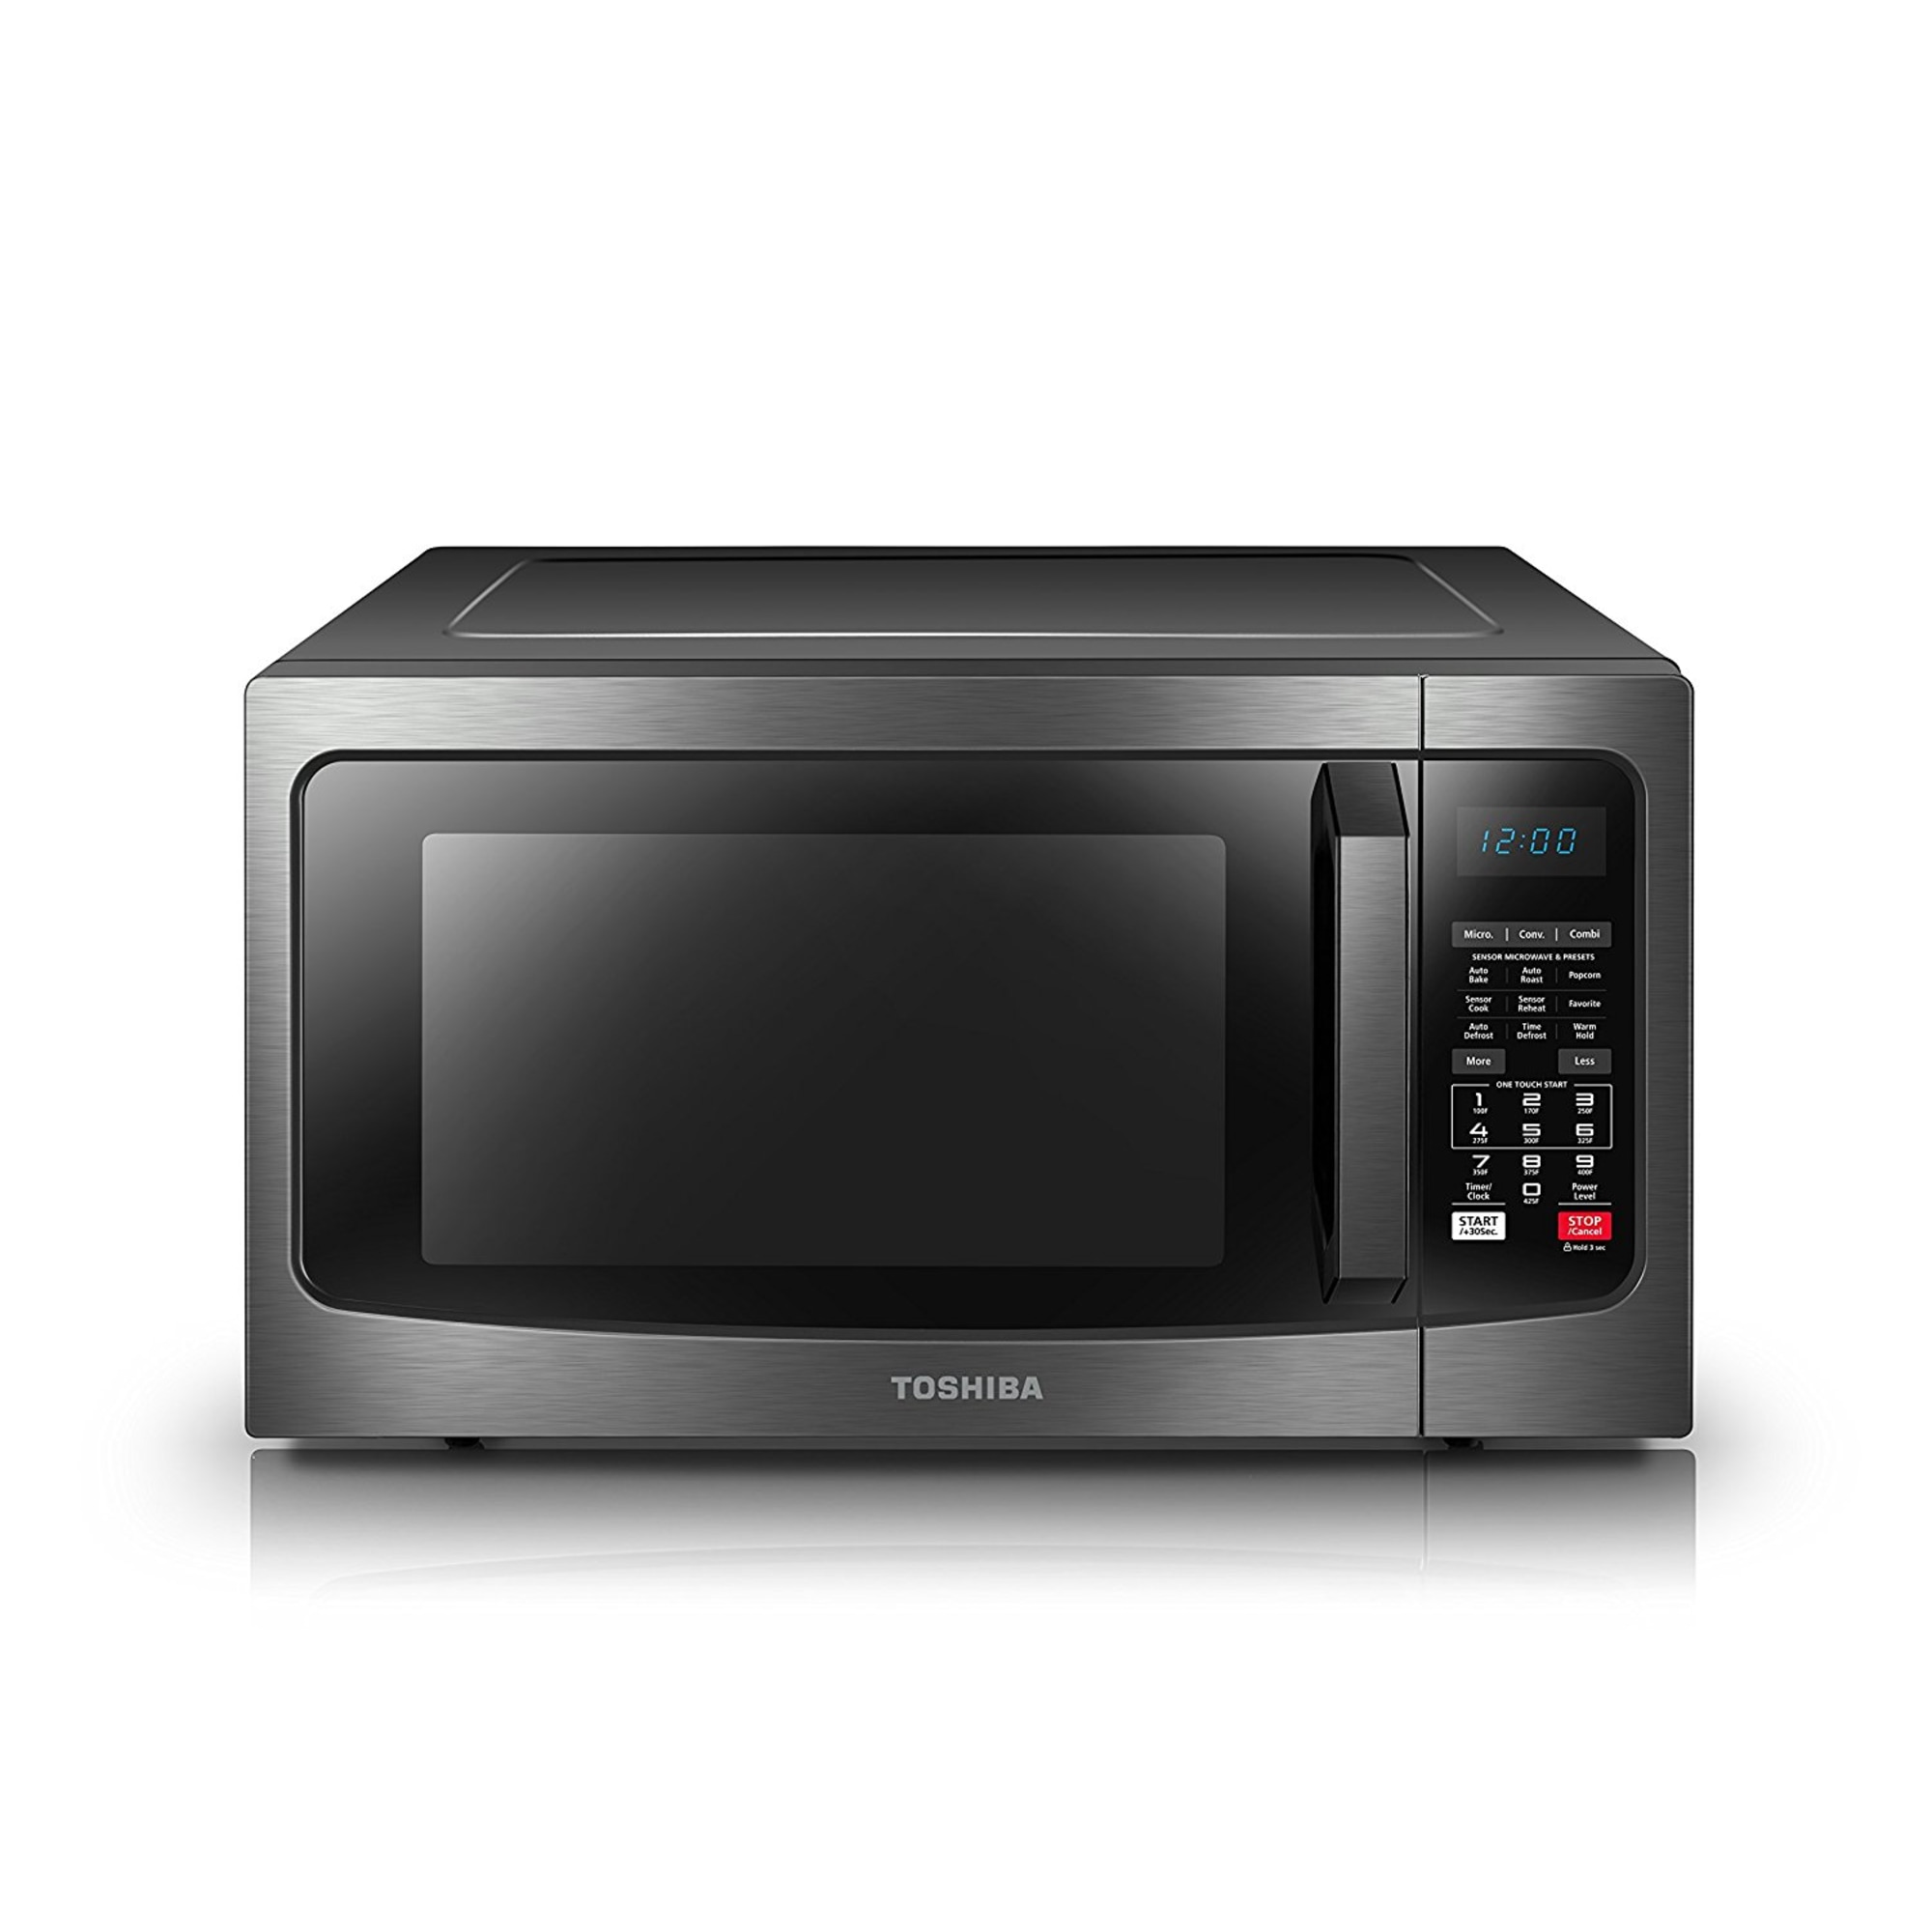 Toshiba ML2-EC42SAESS 1.5 Cu. Ft. Convection Microwave, Stainless Steel - image 2 of 8